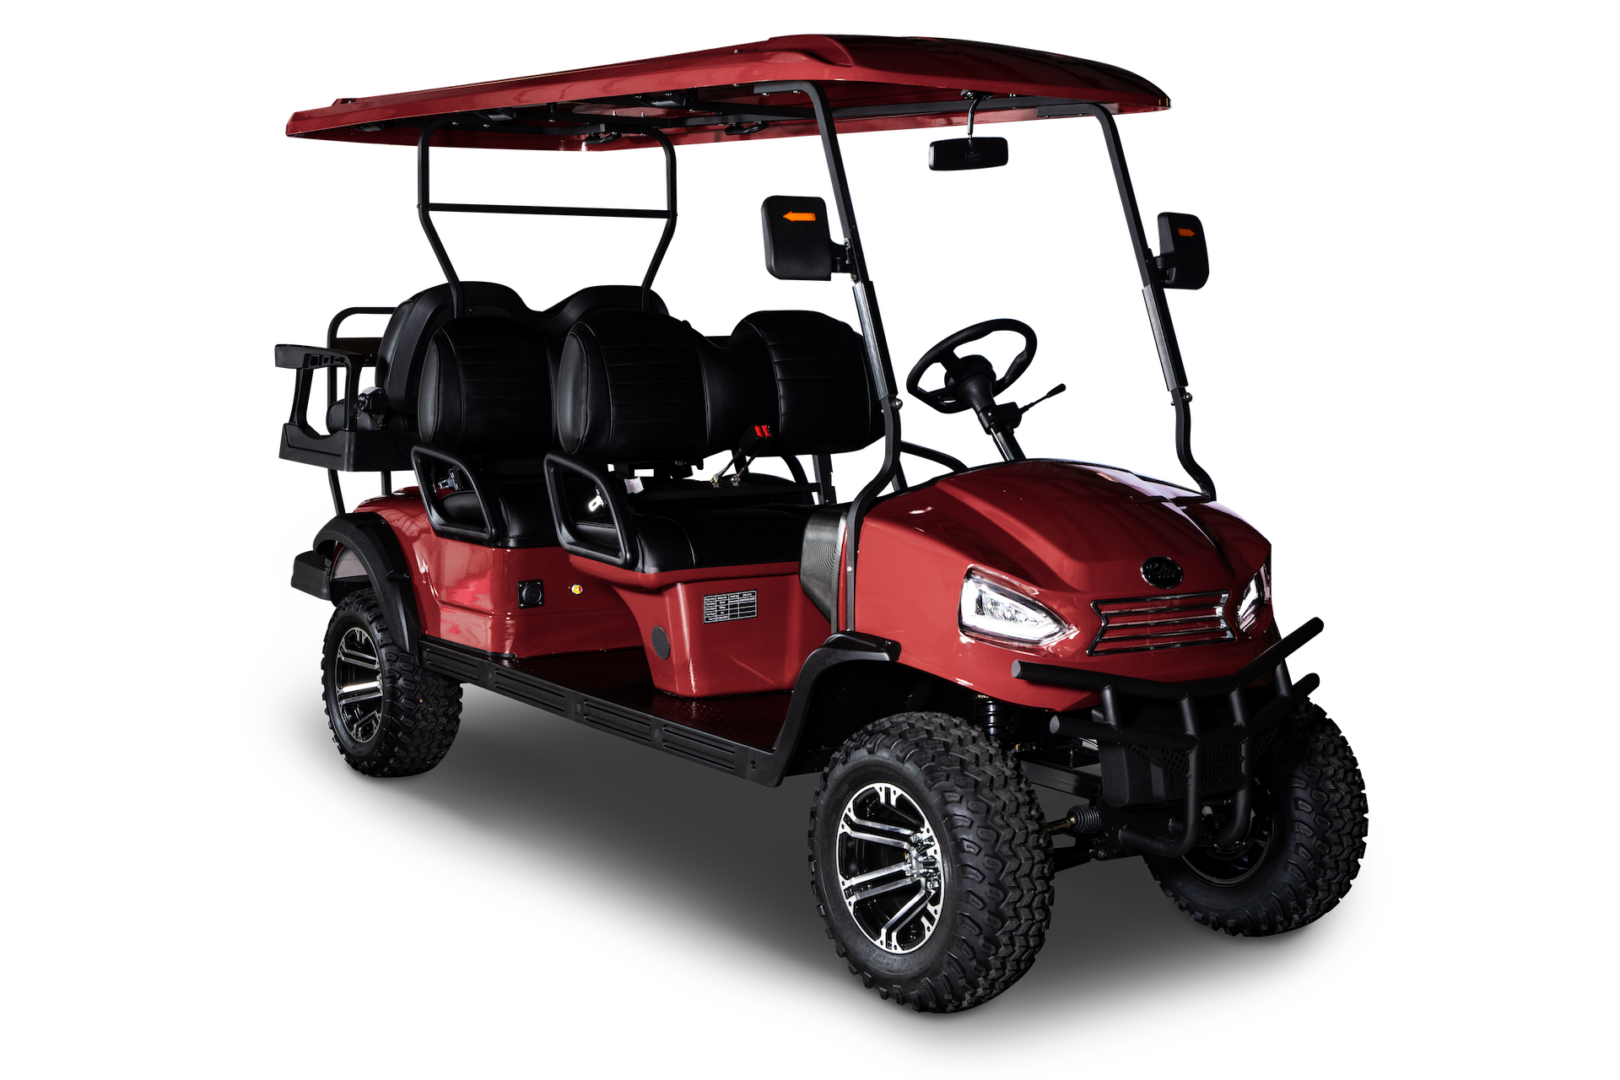 A red golf cart is shown on the ground.